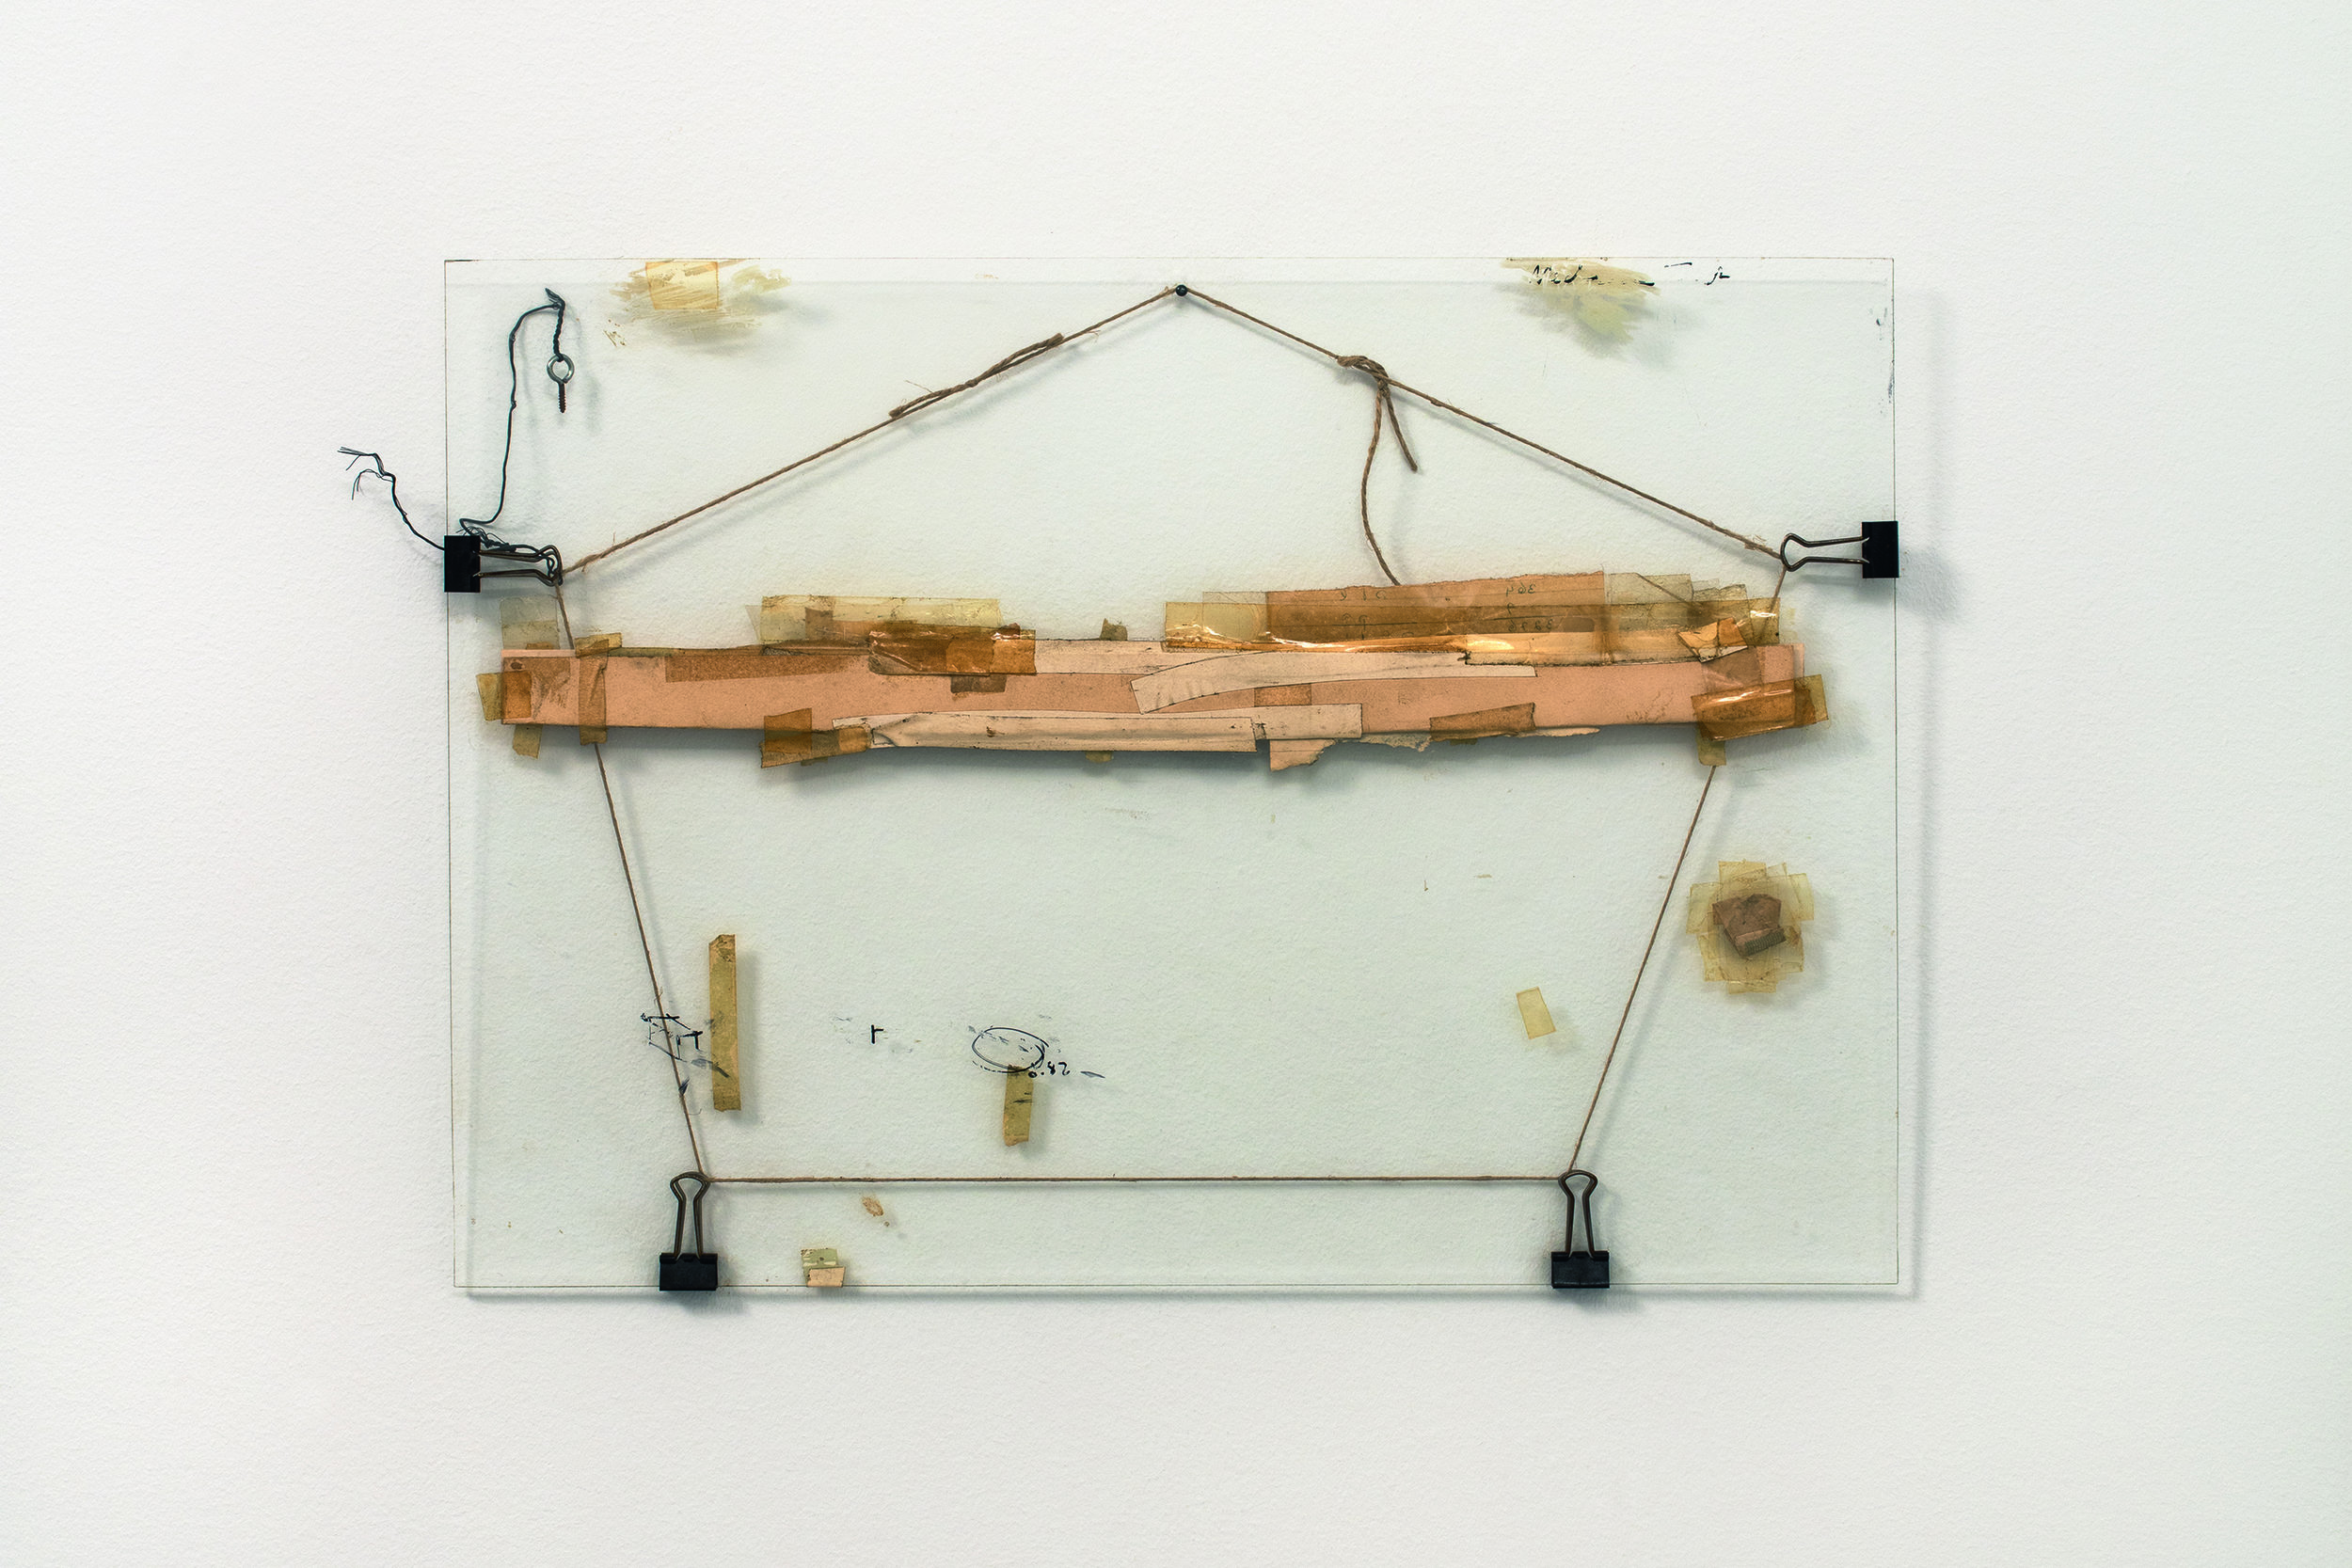  Nahum Tevet, Untitled #3, 1972, restored by the artist, 2016. Cardboard, binder clips, twine, wire, screw eye, masking tape, transparent tape, plastic tape, marker, and wax pencil on glass, 13 3/4 x 19 3/8 x 7/16 in. (34.9 x 49.2 x 1.1 cm). Collecti